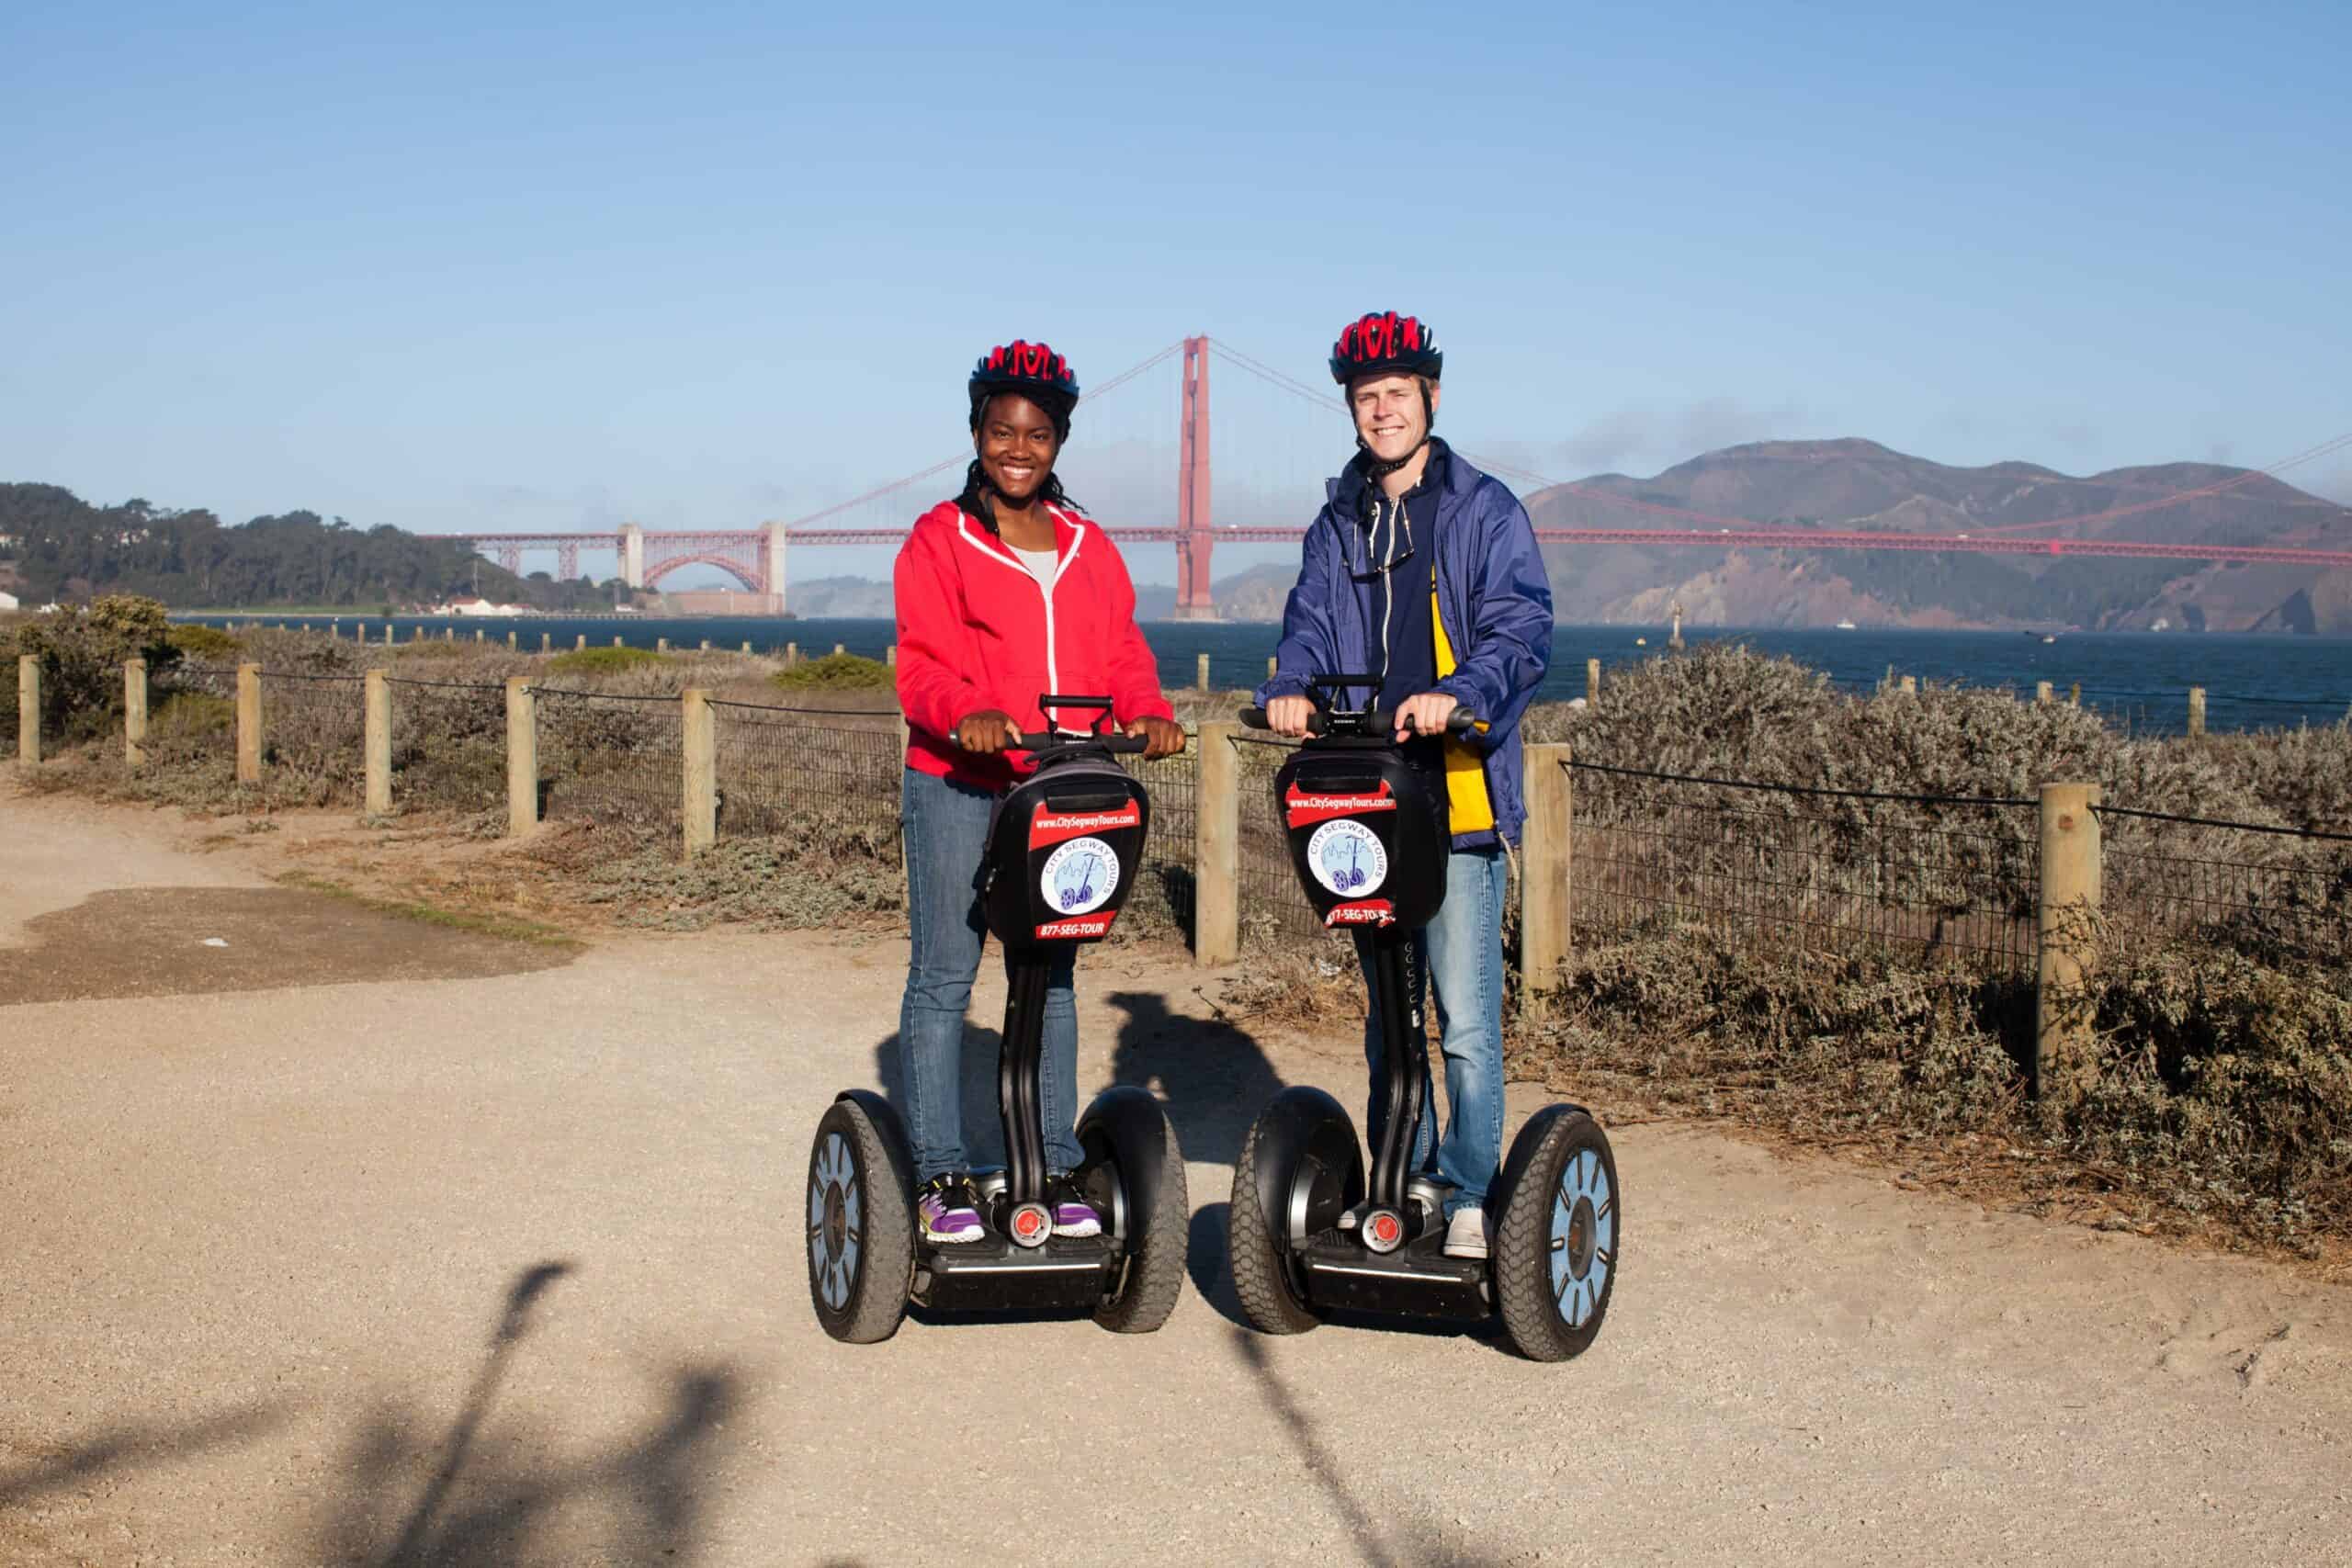 Two people ride Segways in front of the Golden Gate Bridge in San Francisco, California